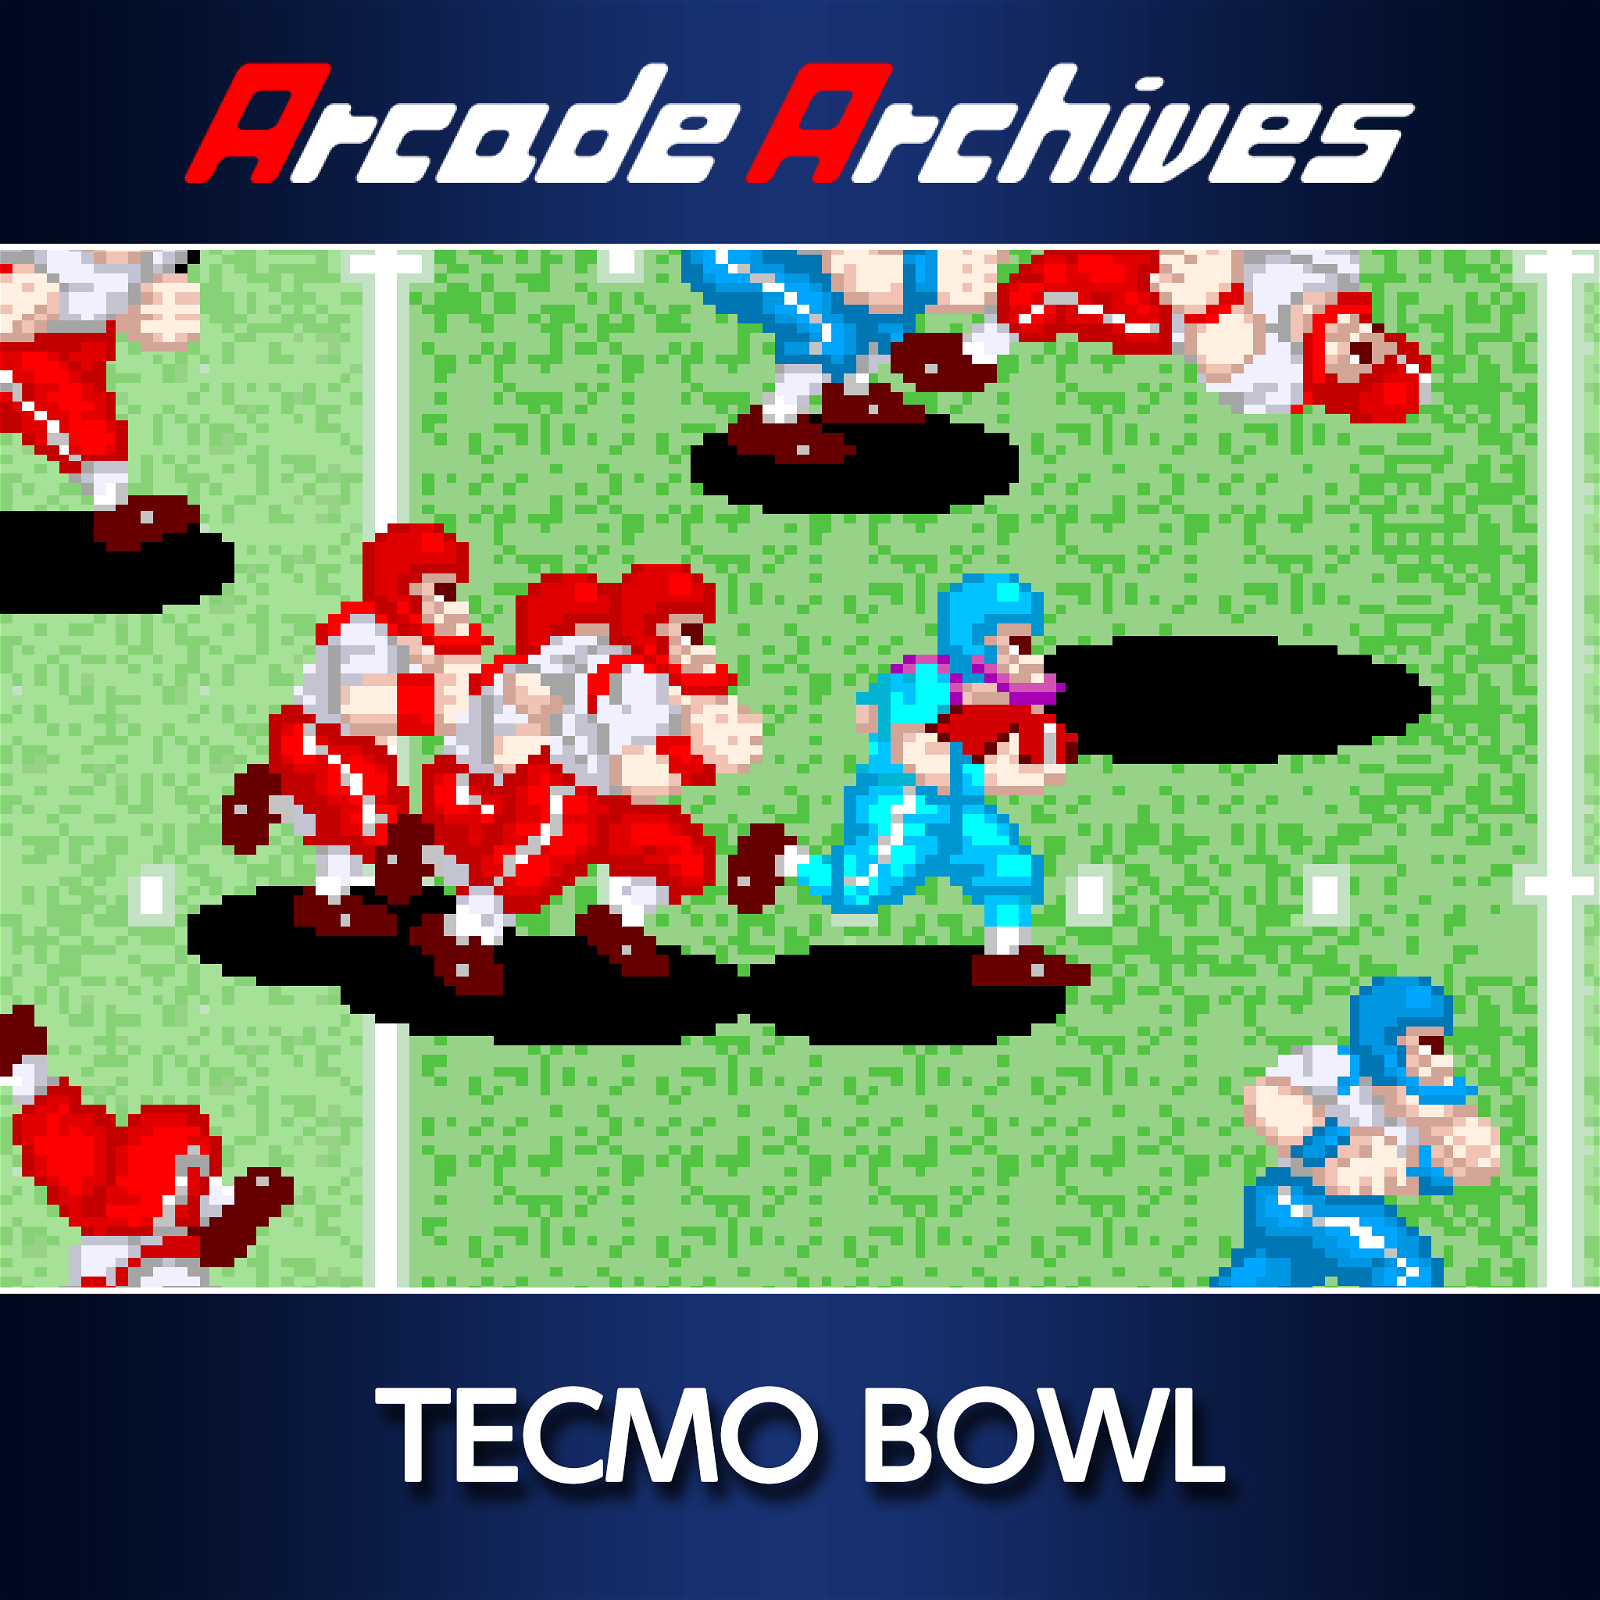 Image of Arcade Archives TECMO BOWL